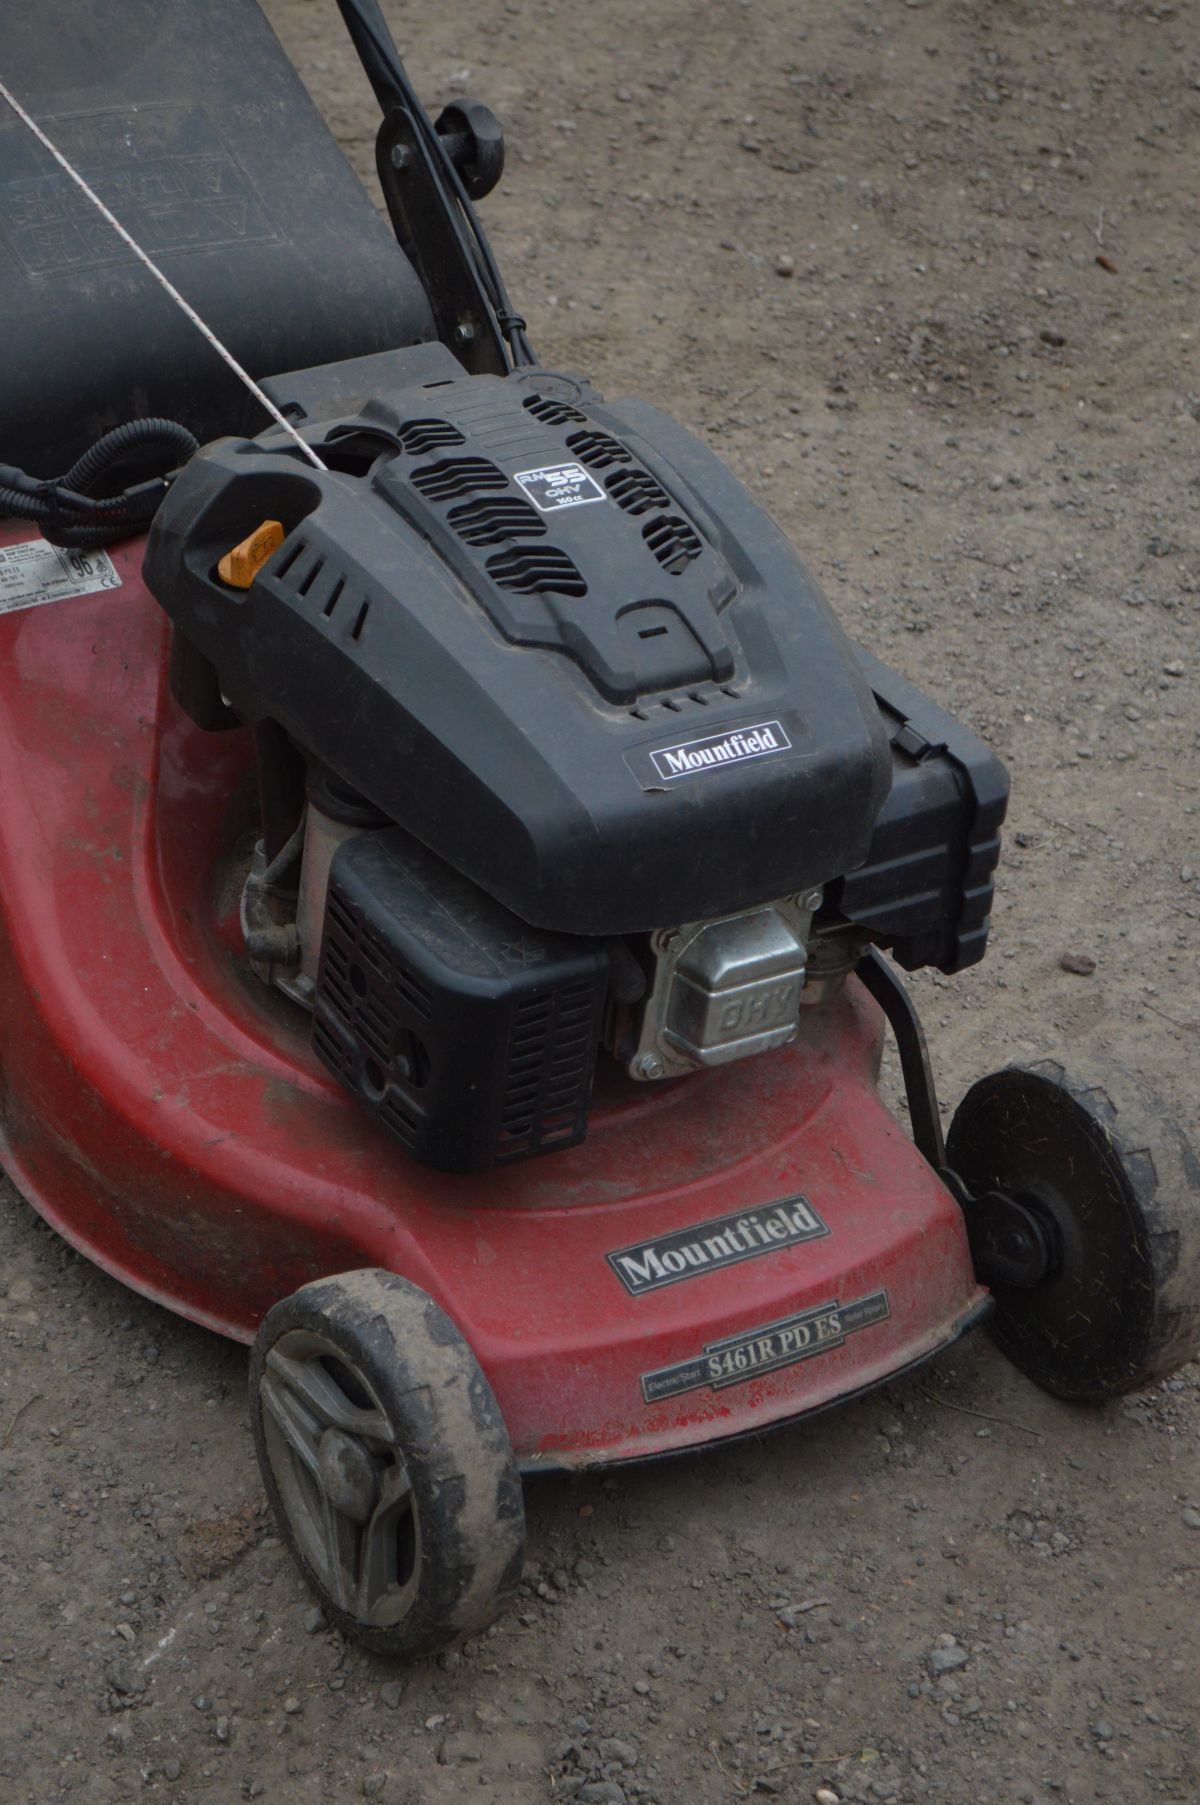 A MOUNTFIELD S461R PD ES PETROL SELF PROPELLED ROLLER LAWNMOWER, with battery key start, 160cc - Image 3 of 3